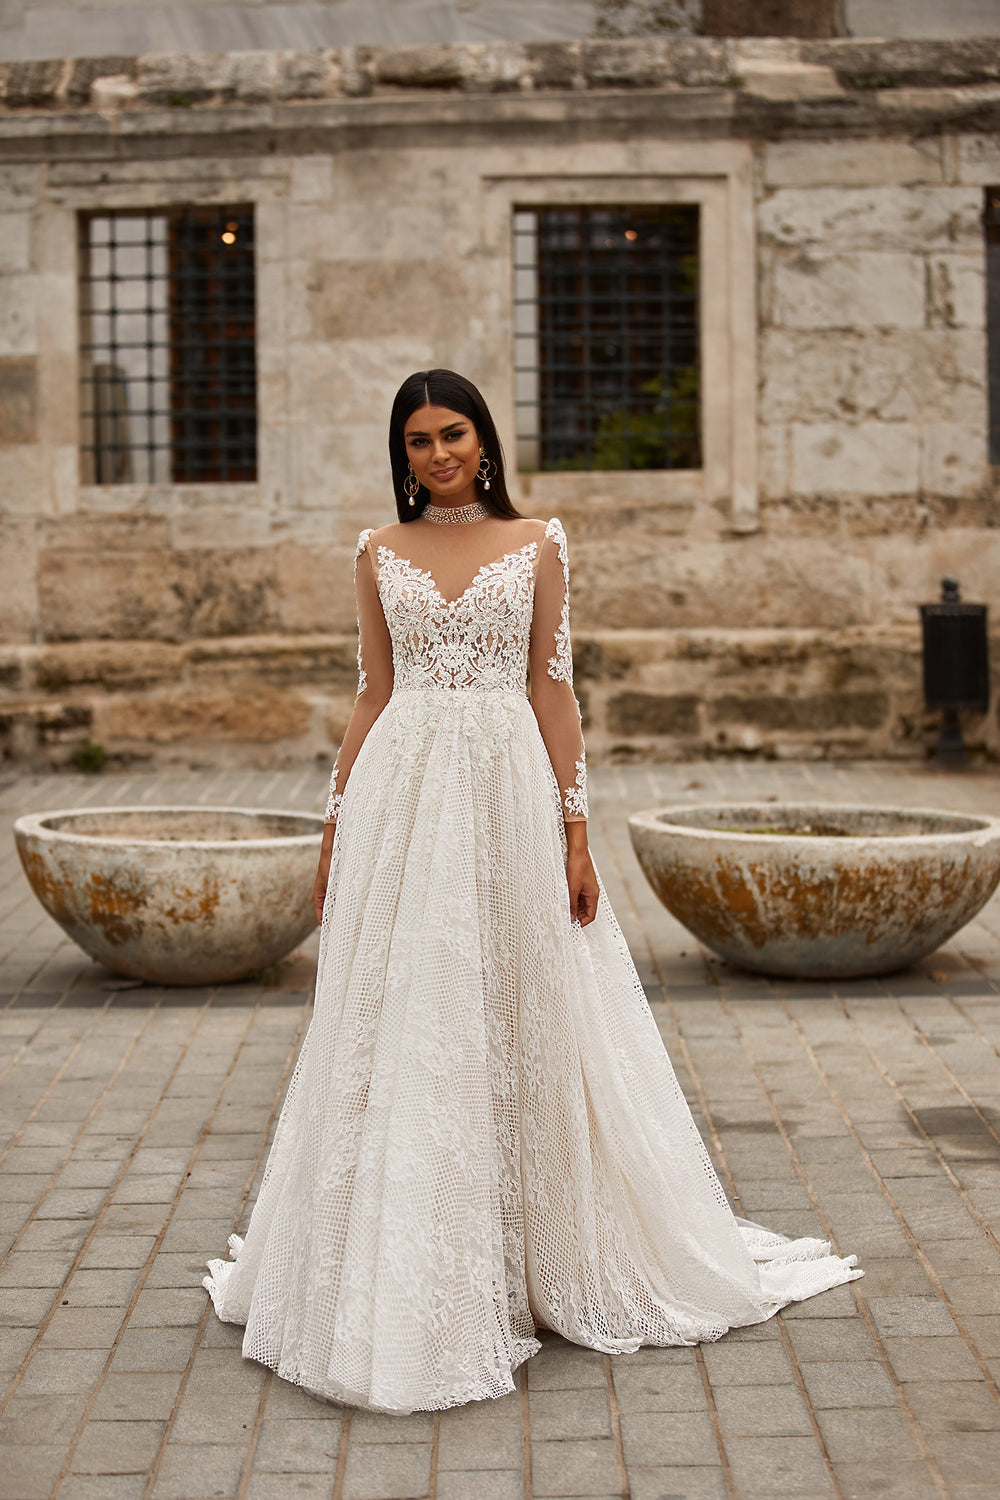 Toulin Gown - High Neck Bridal Gown with Lace Bodice